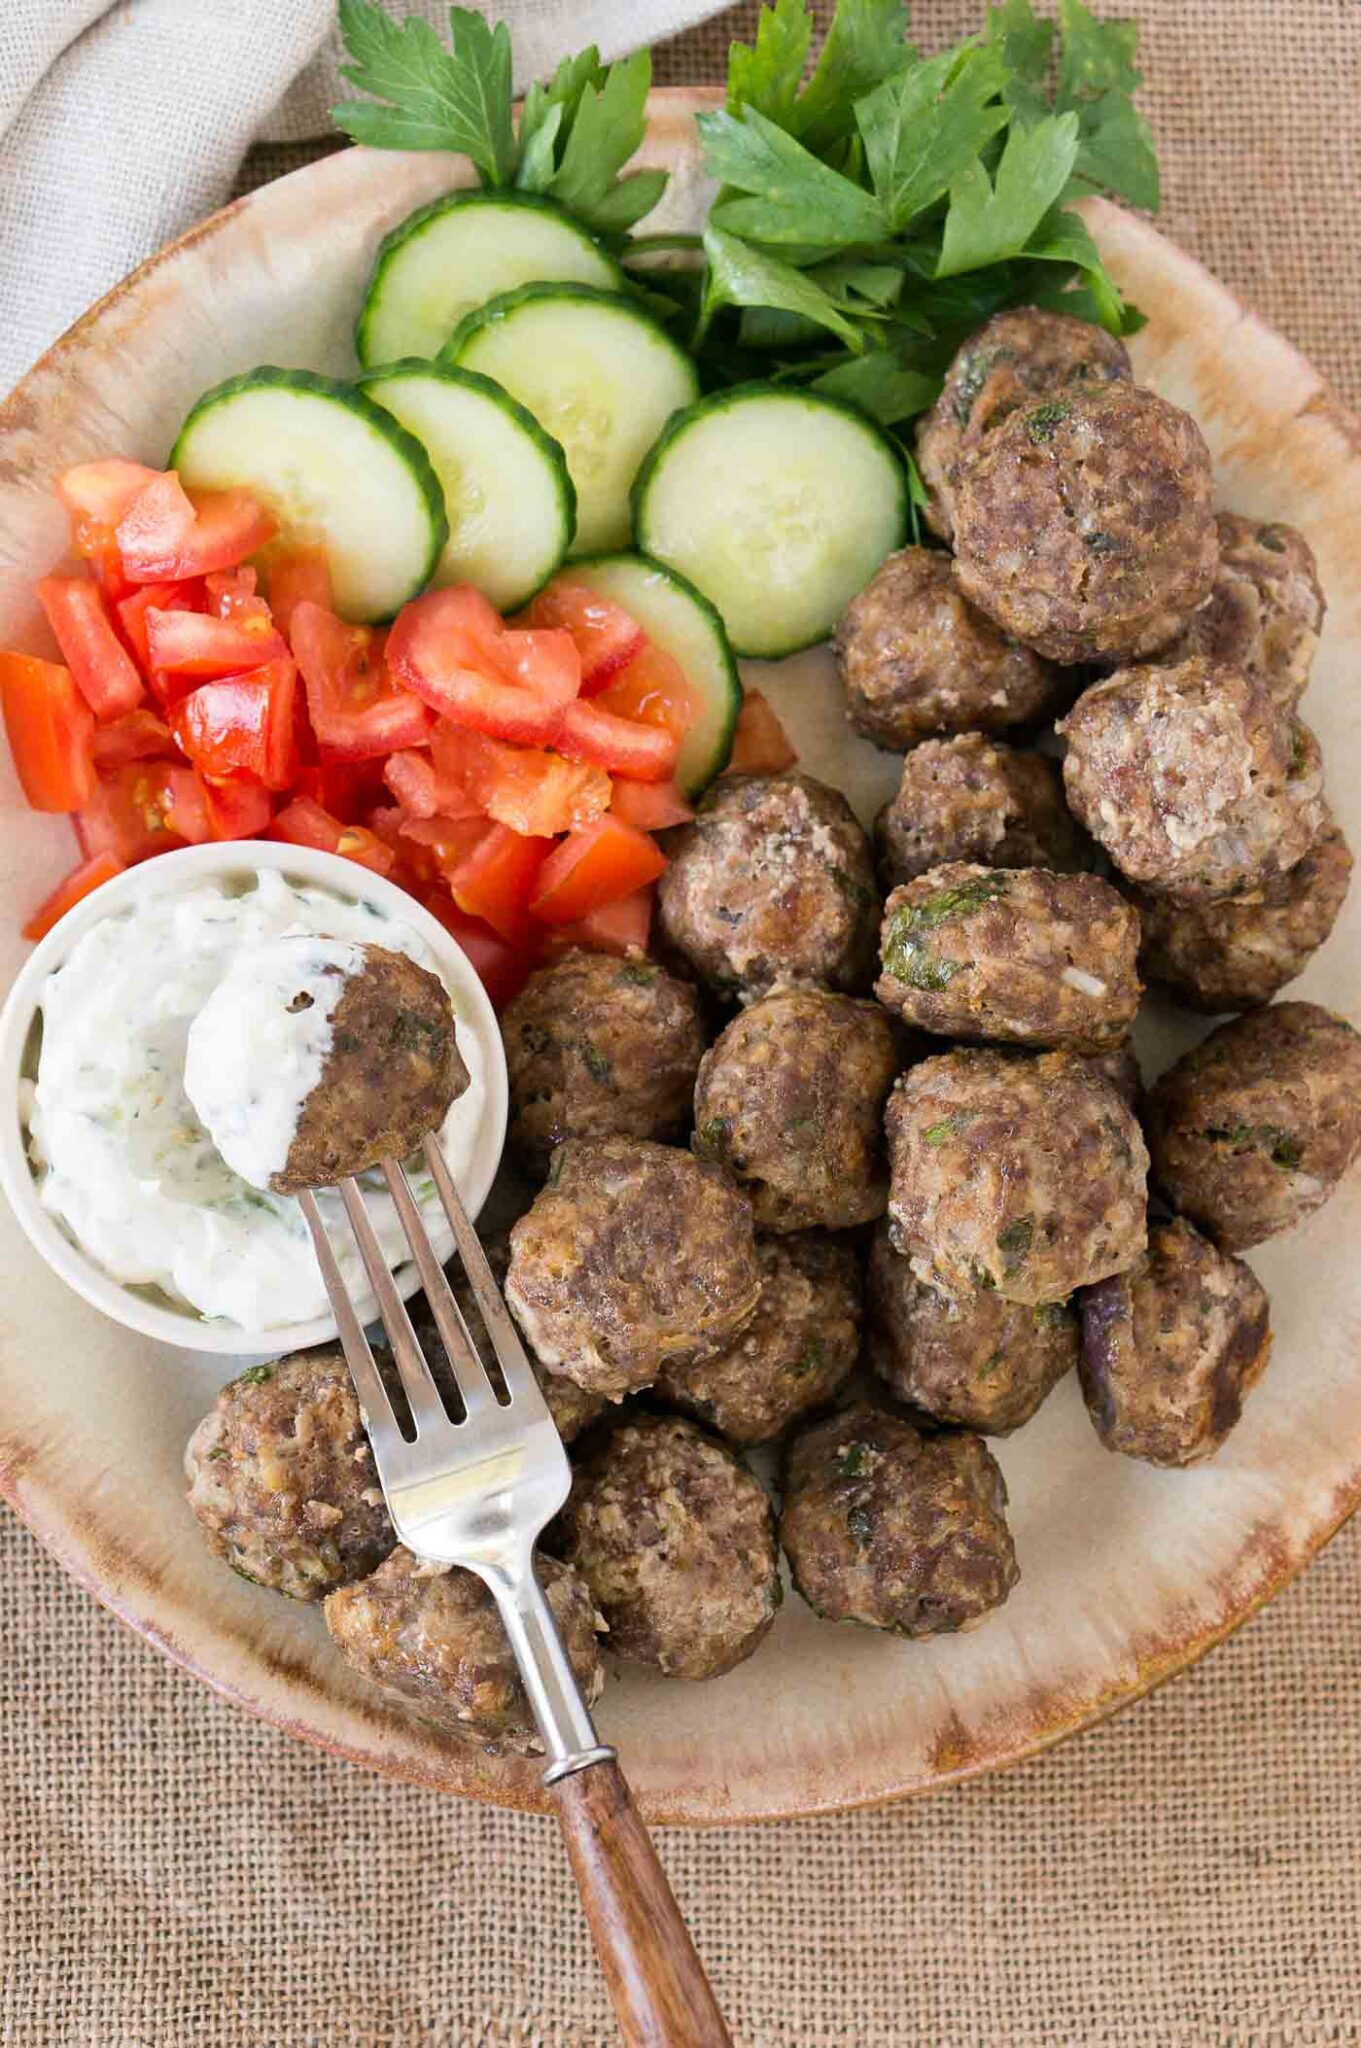 greek meatballs (keftedes) with cucumbers tomatoes and tzatziki sauce